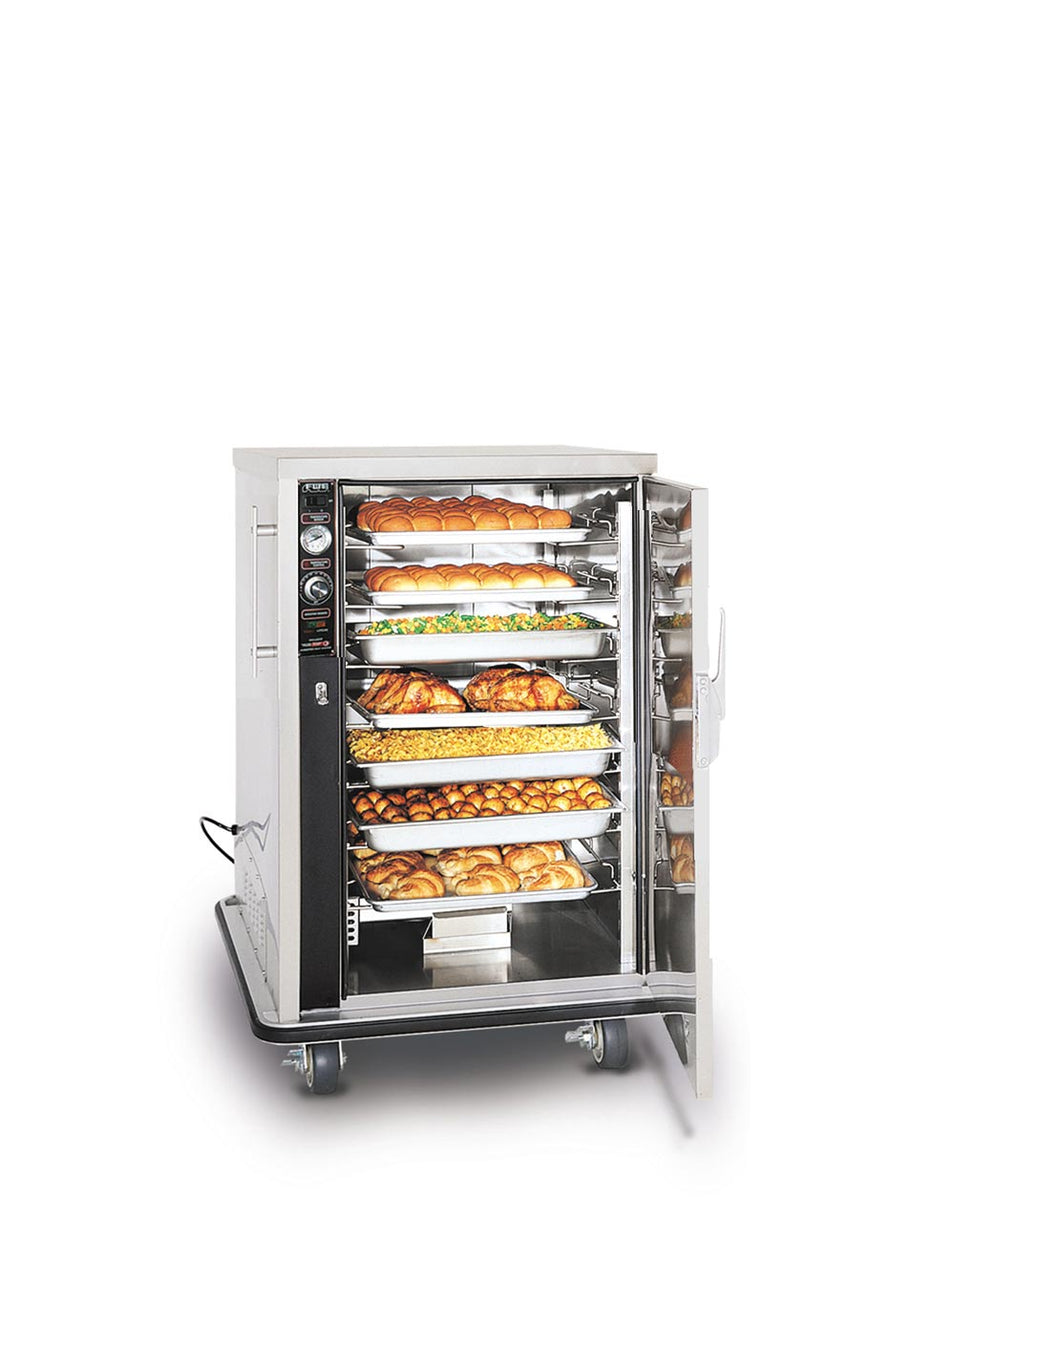 Mobile Heated Holding Cabinet for Bulk Foods - UHS-7